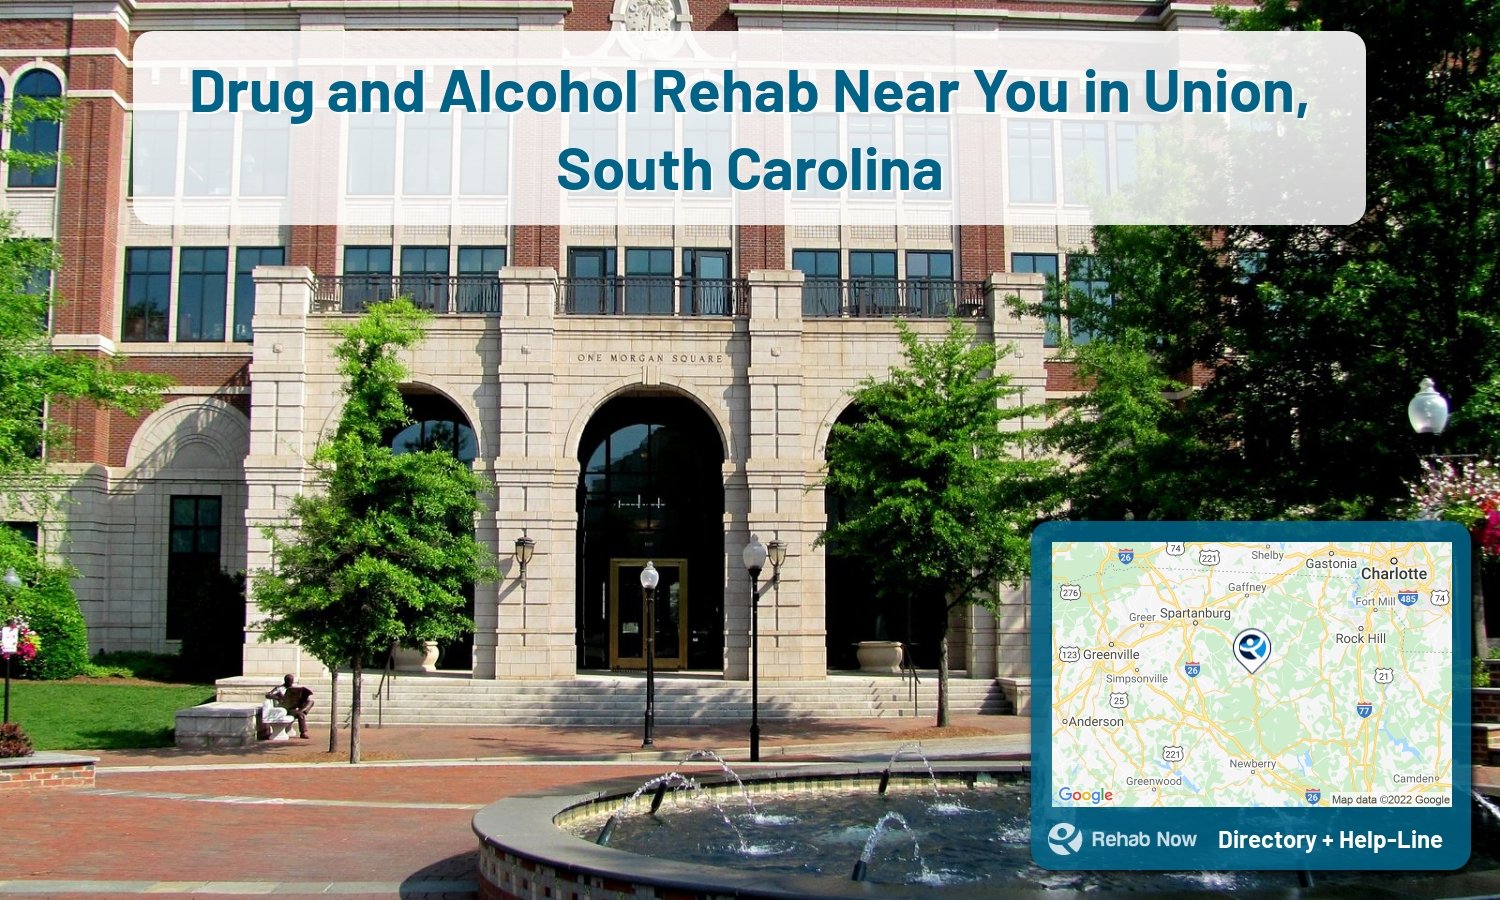 Find drug rehab and alcohol treatment services in Union. Our experts help you find a center in Union, South Carolina